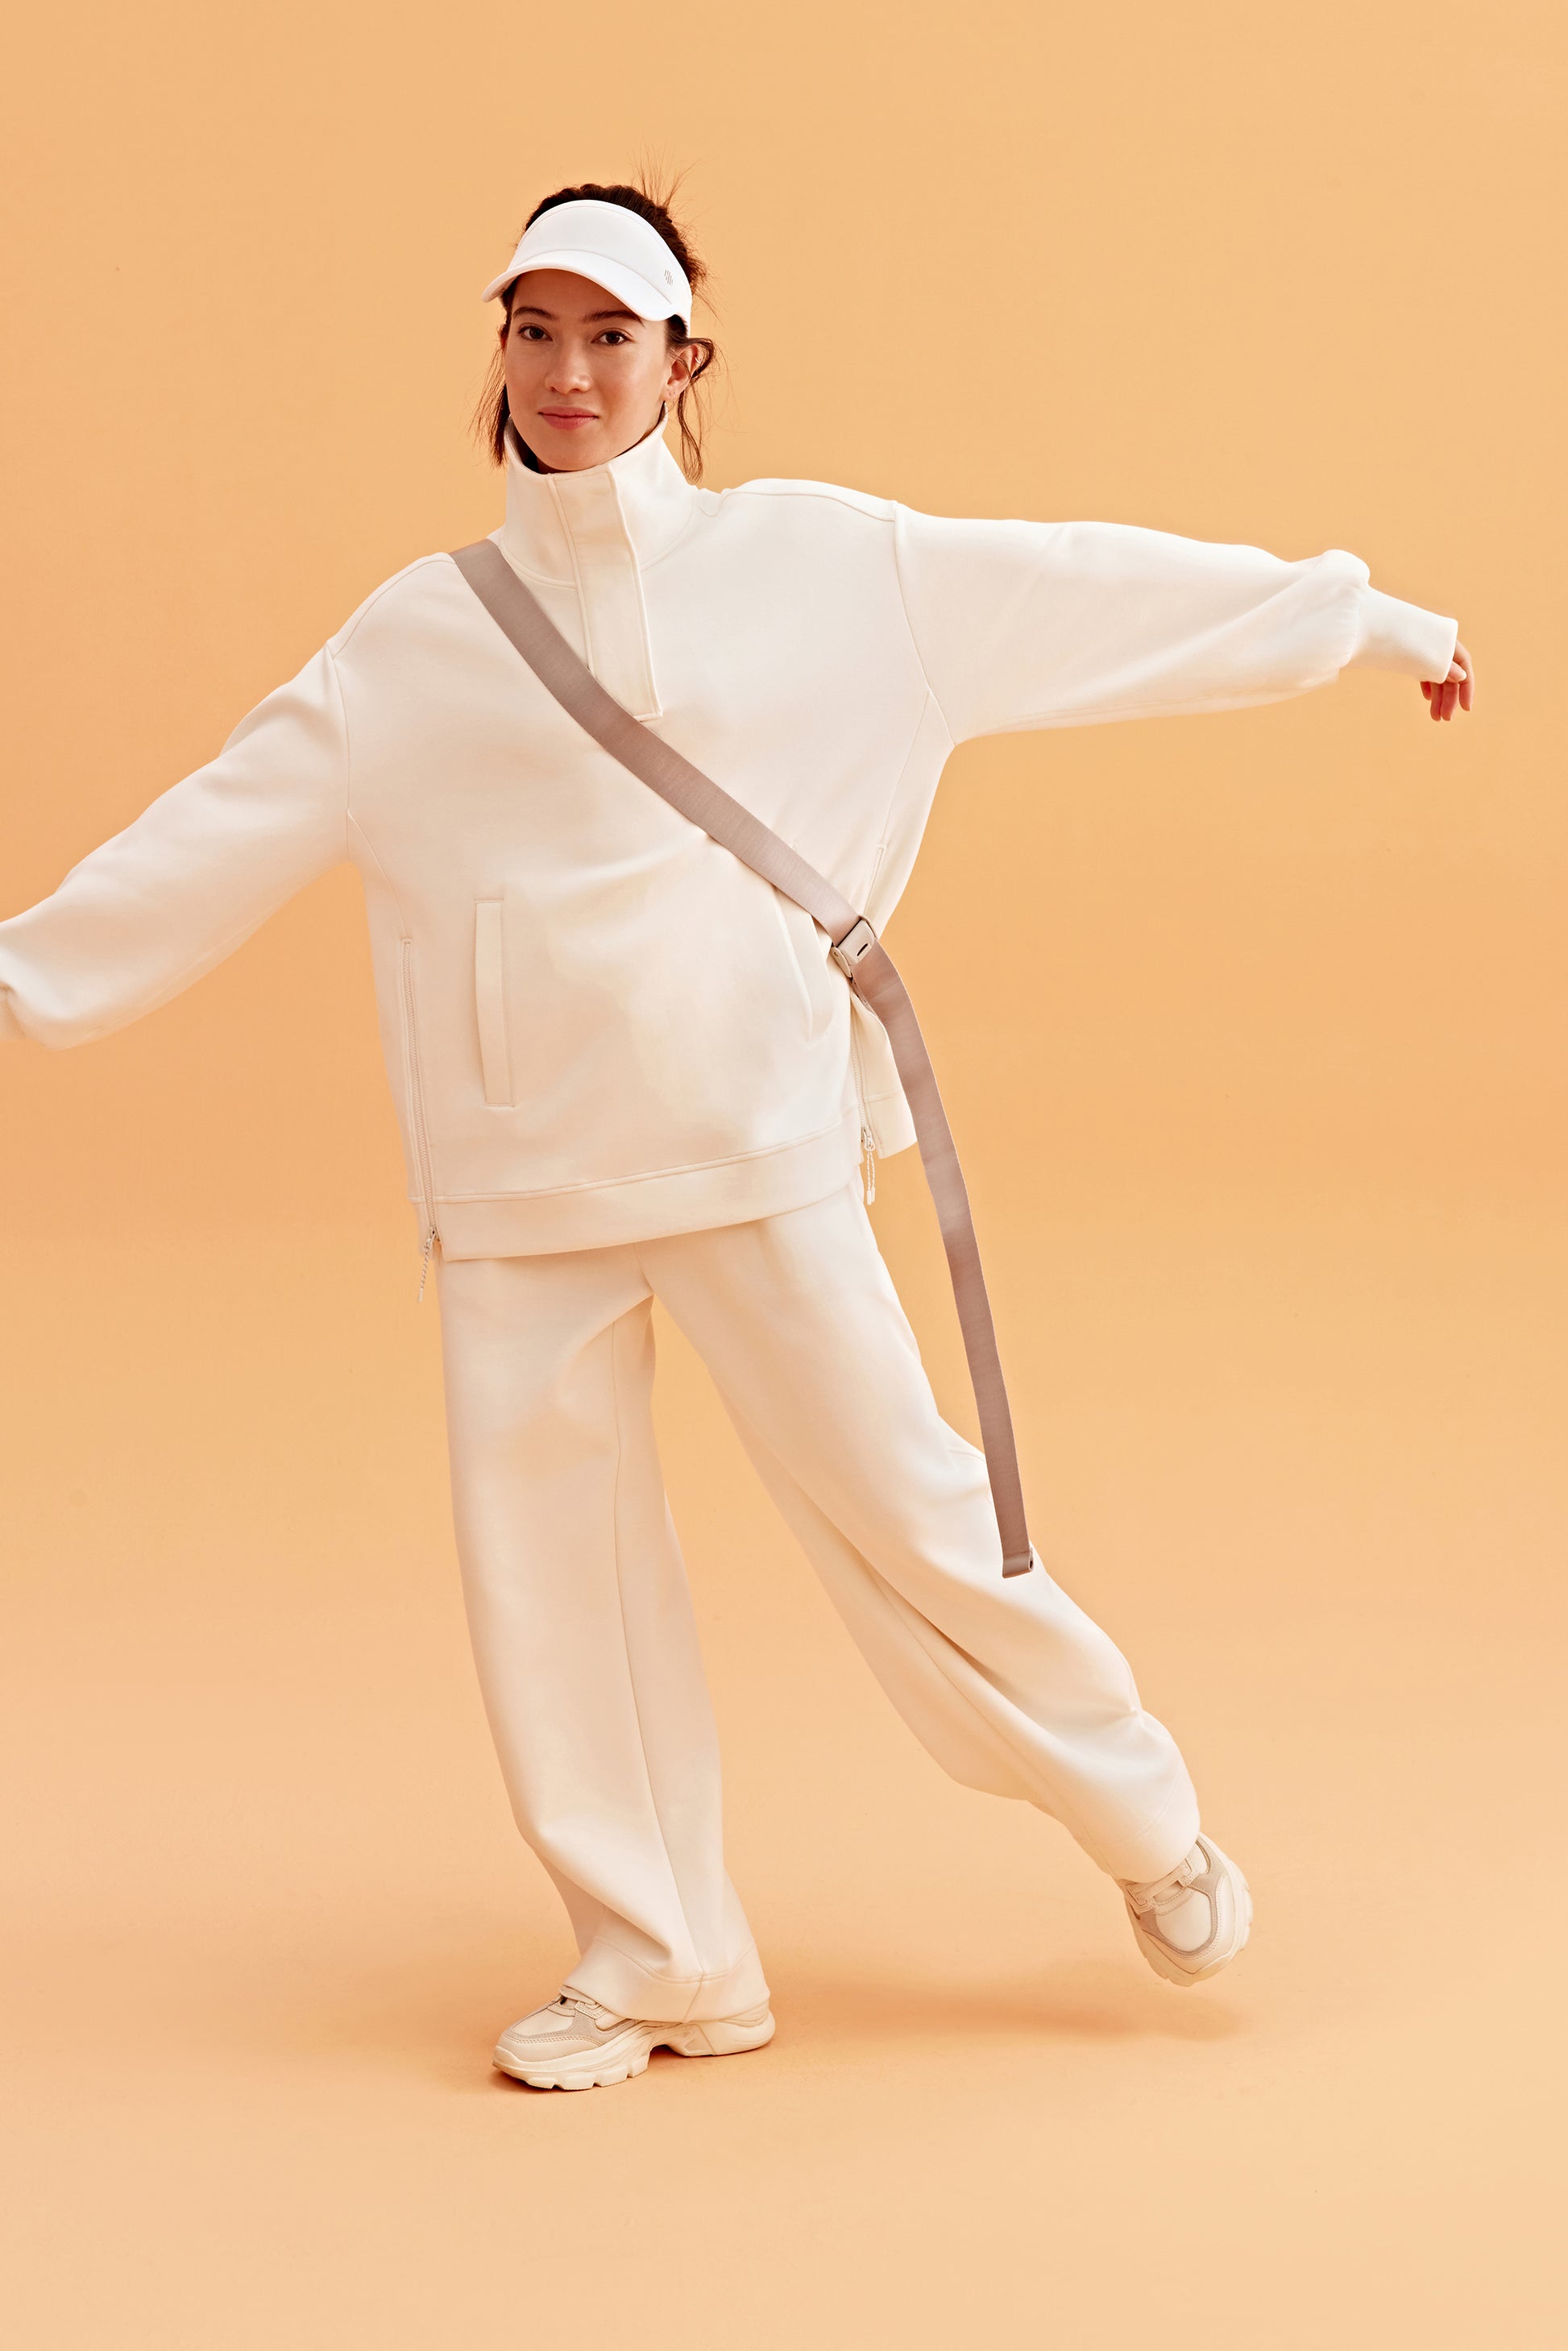 woman wearing a white visor and white half zip sweatshirt and white pants. pair with a white sneakers open her arms